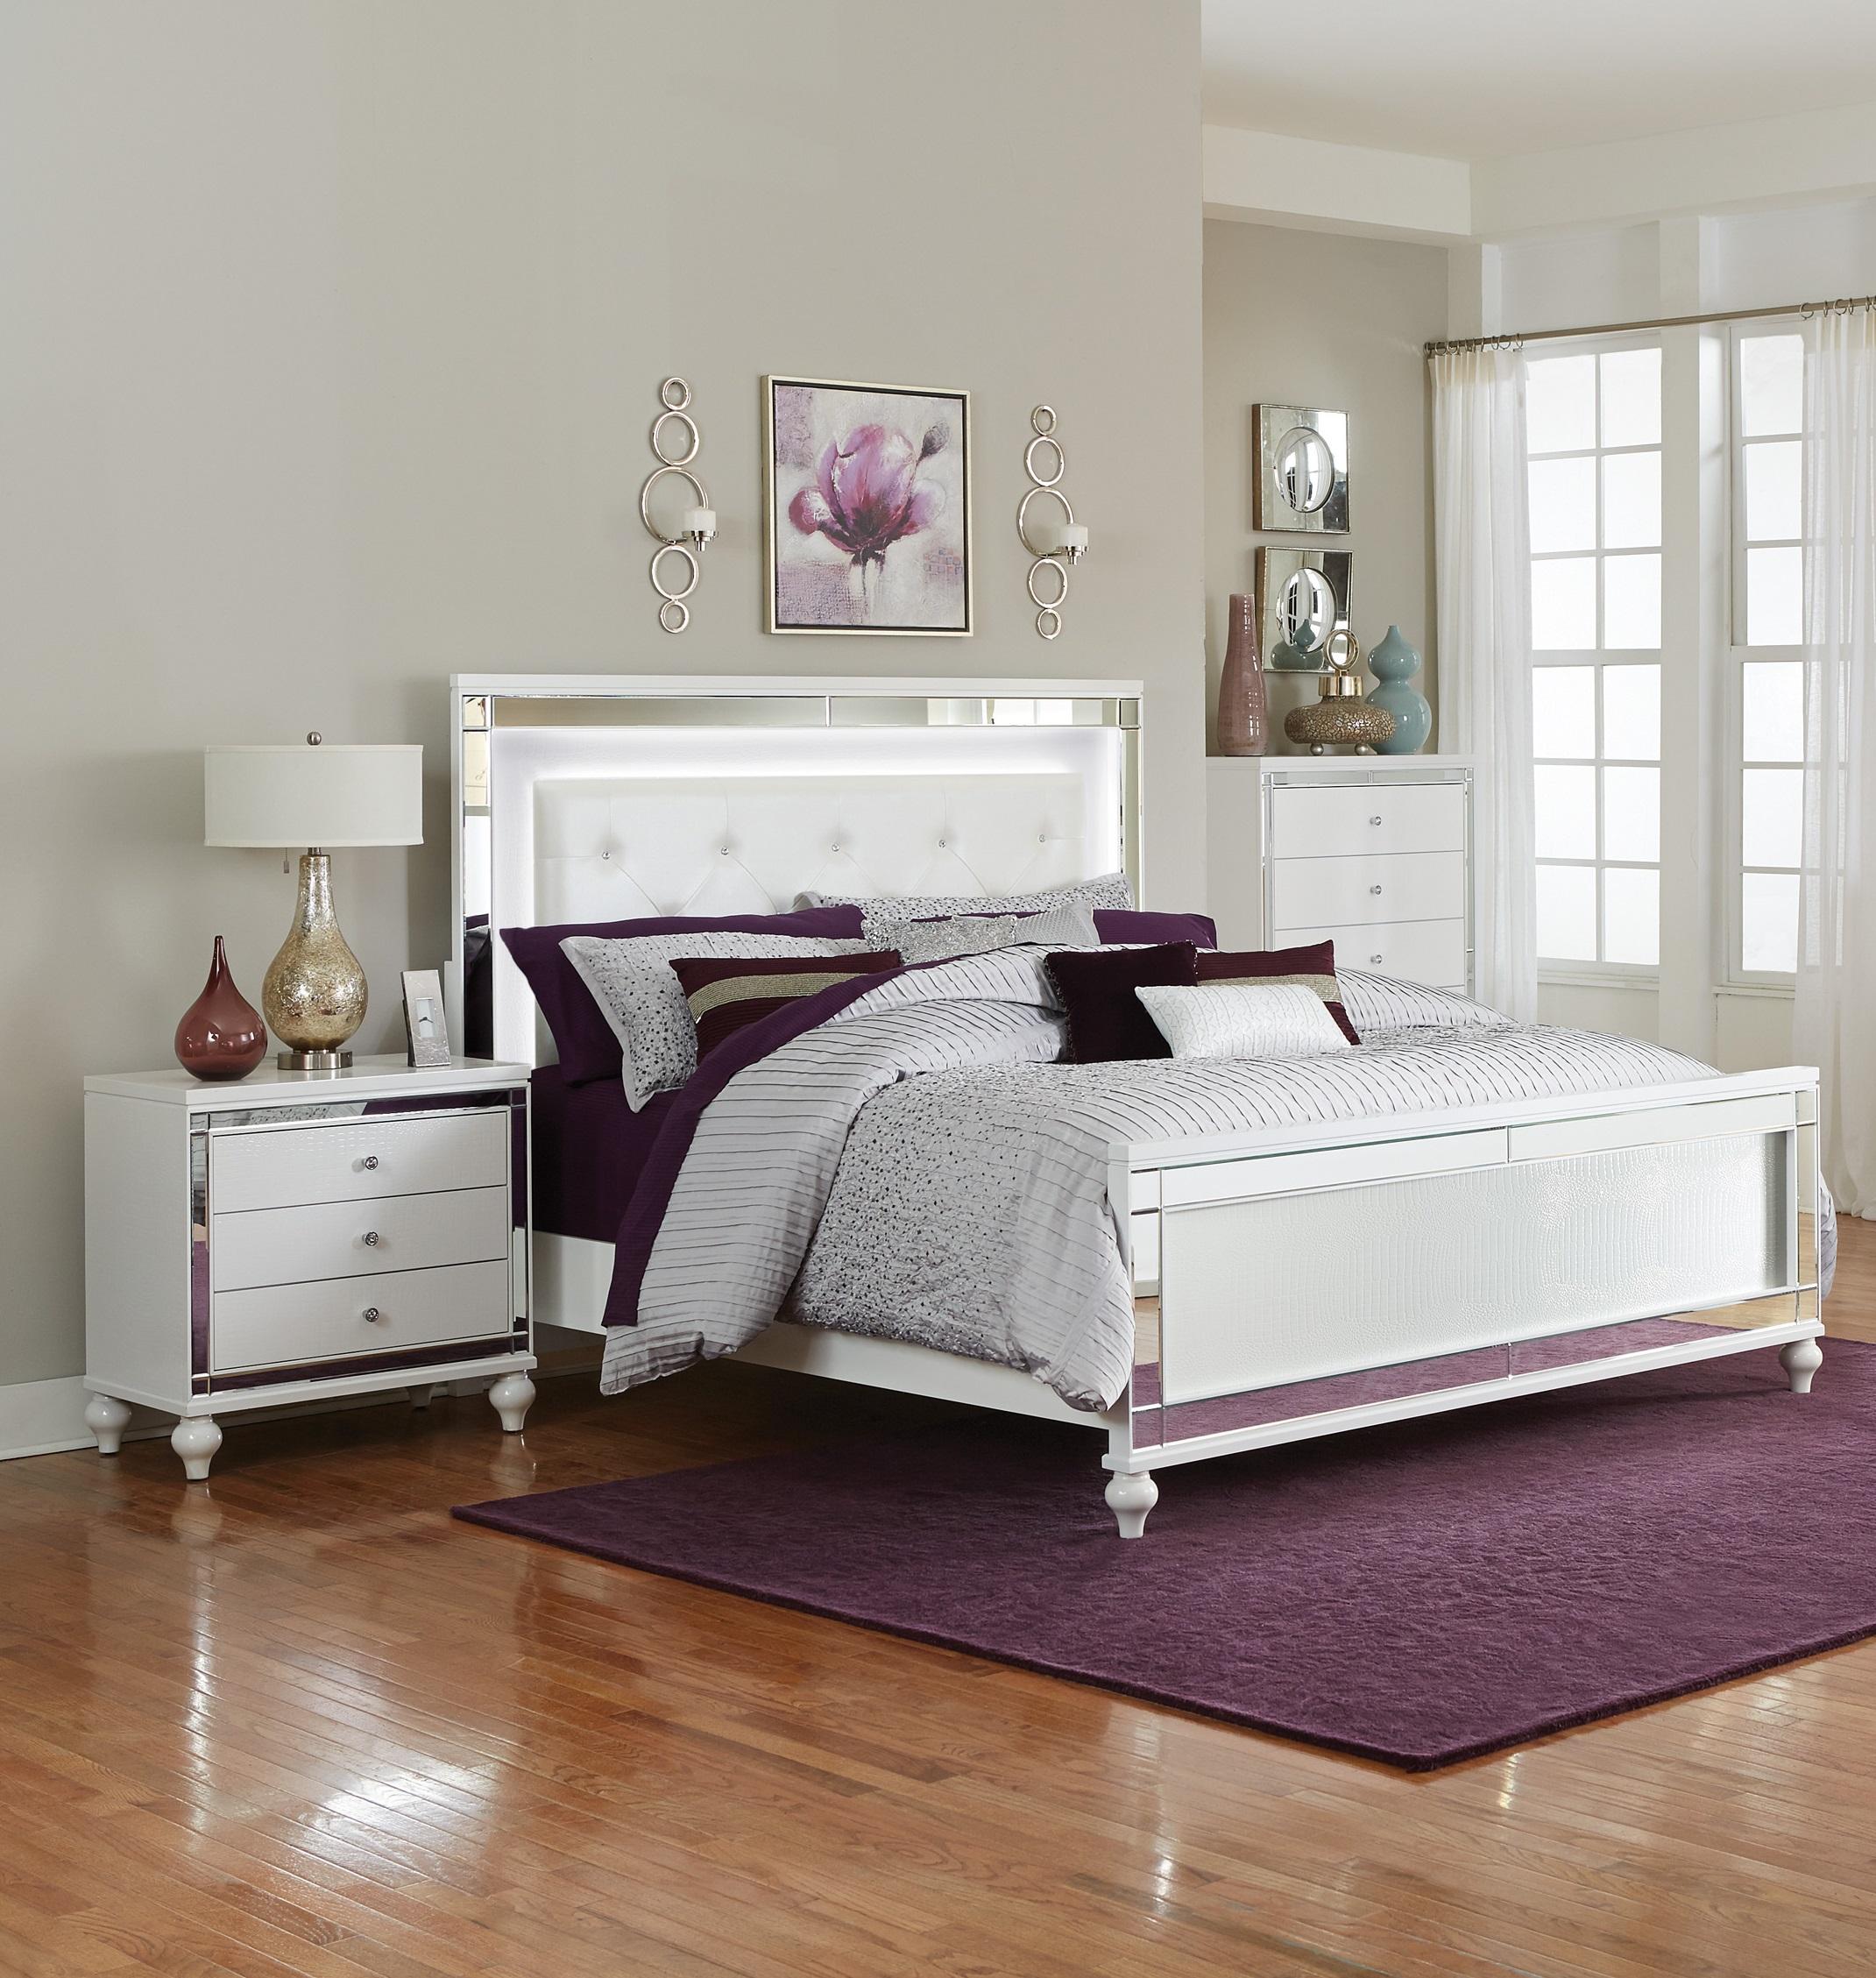 Modern Bedroom Set 1845KLED-1CK-3PC Alonza 1845KLED-1CK-3PC in White Faux Leather